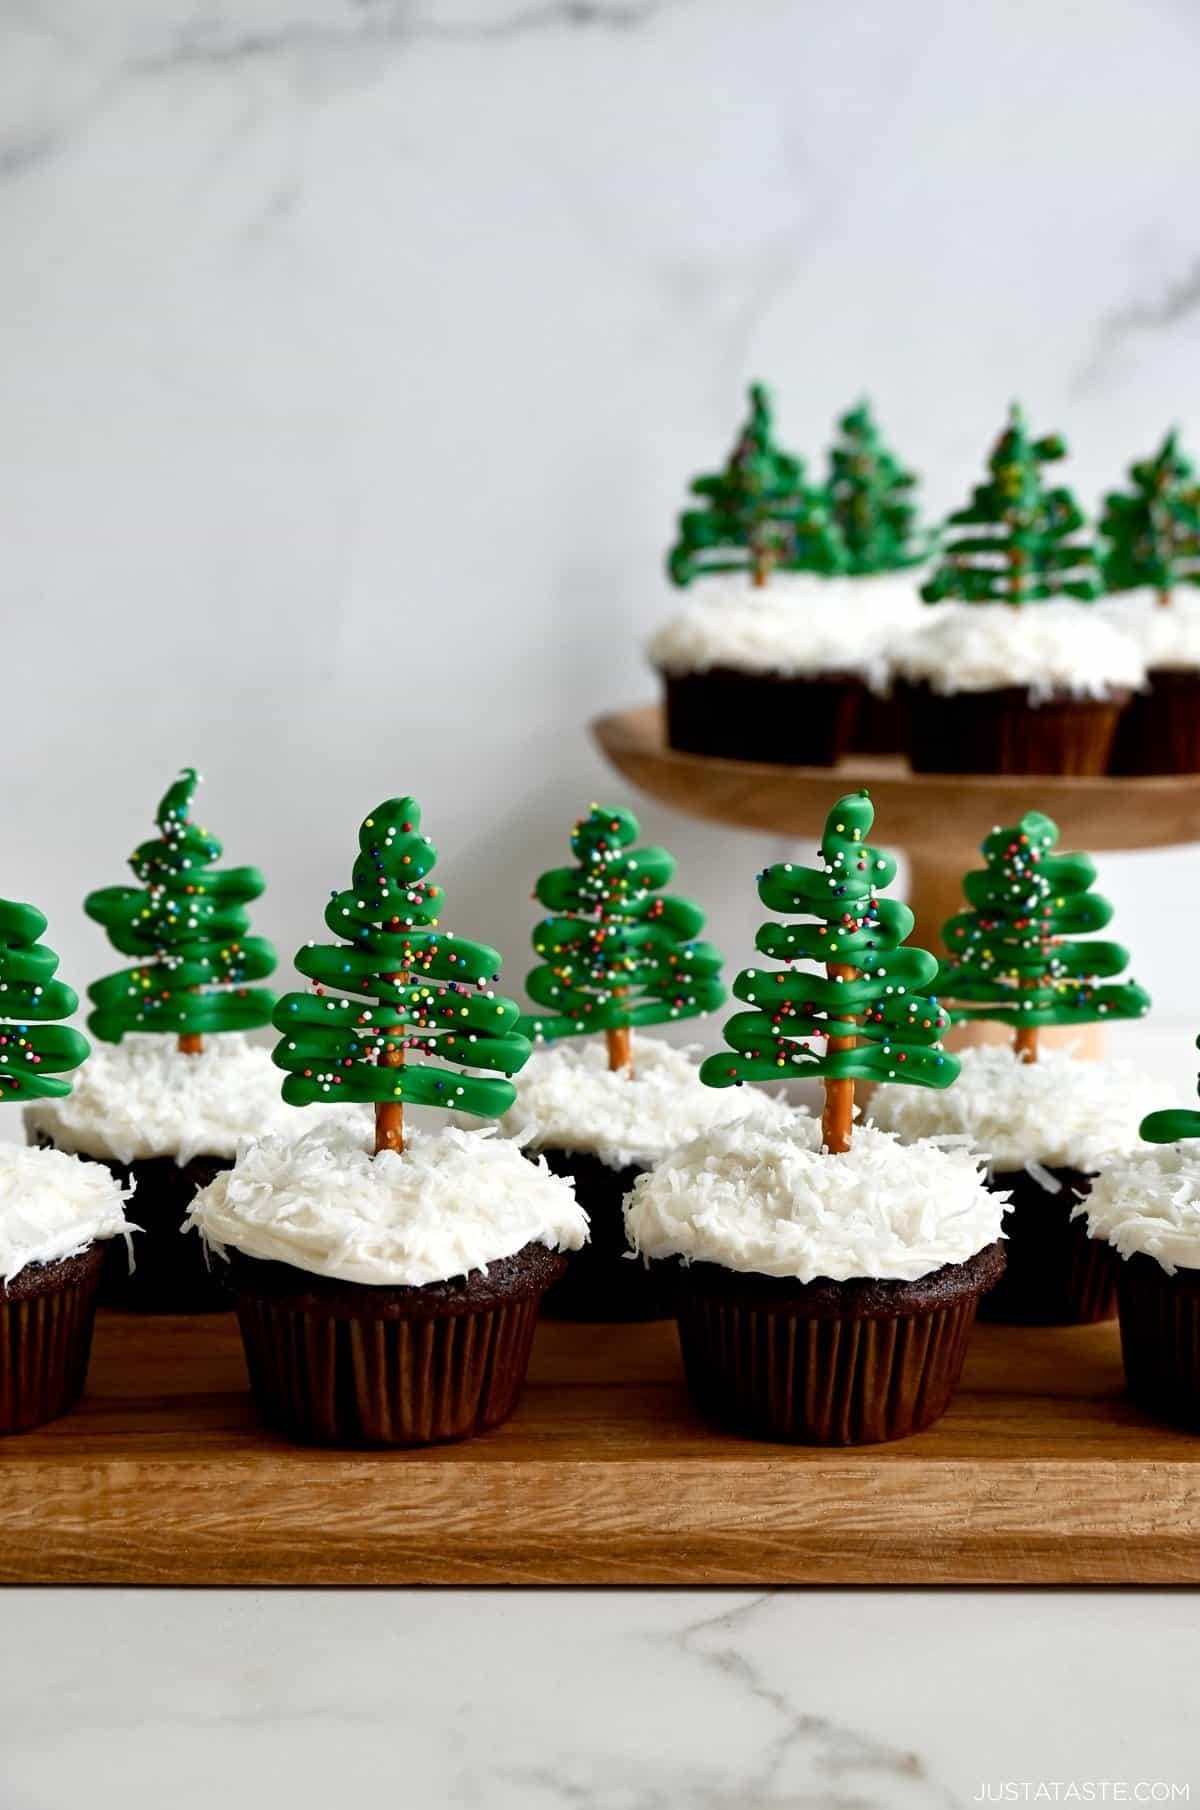 Cupcakes topped with Christmas tree frosting on stick.